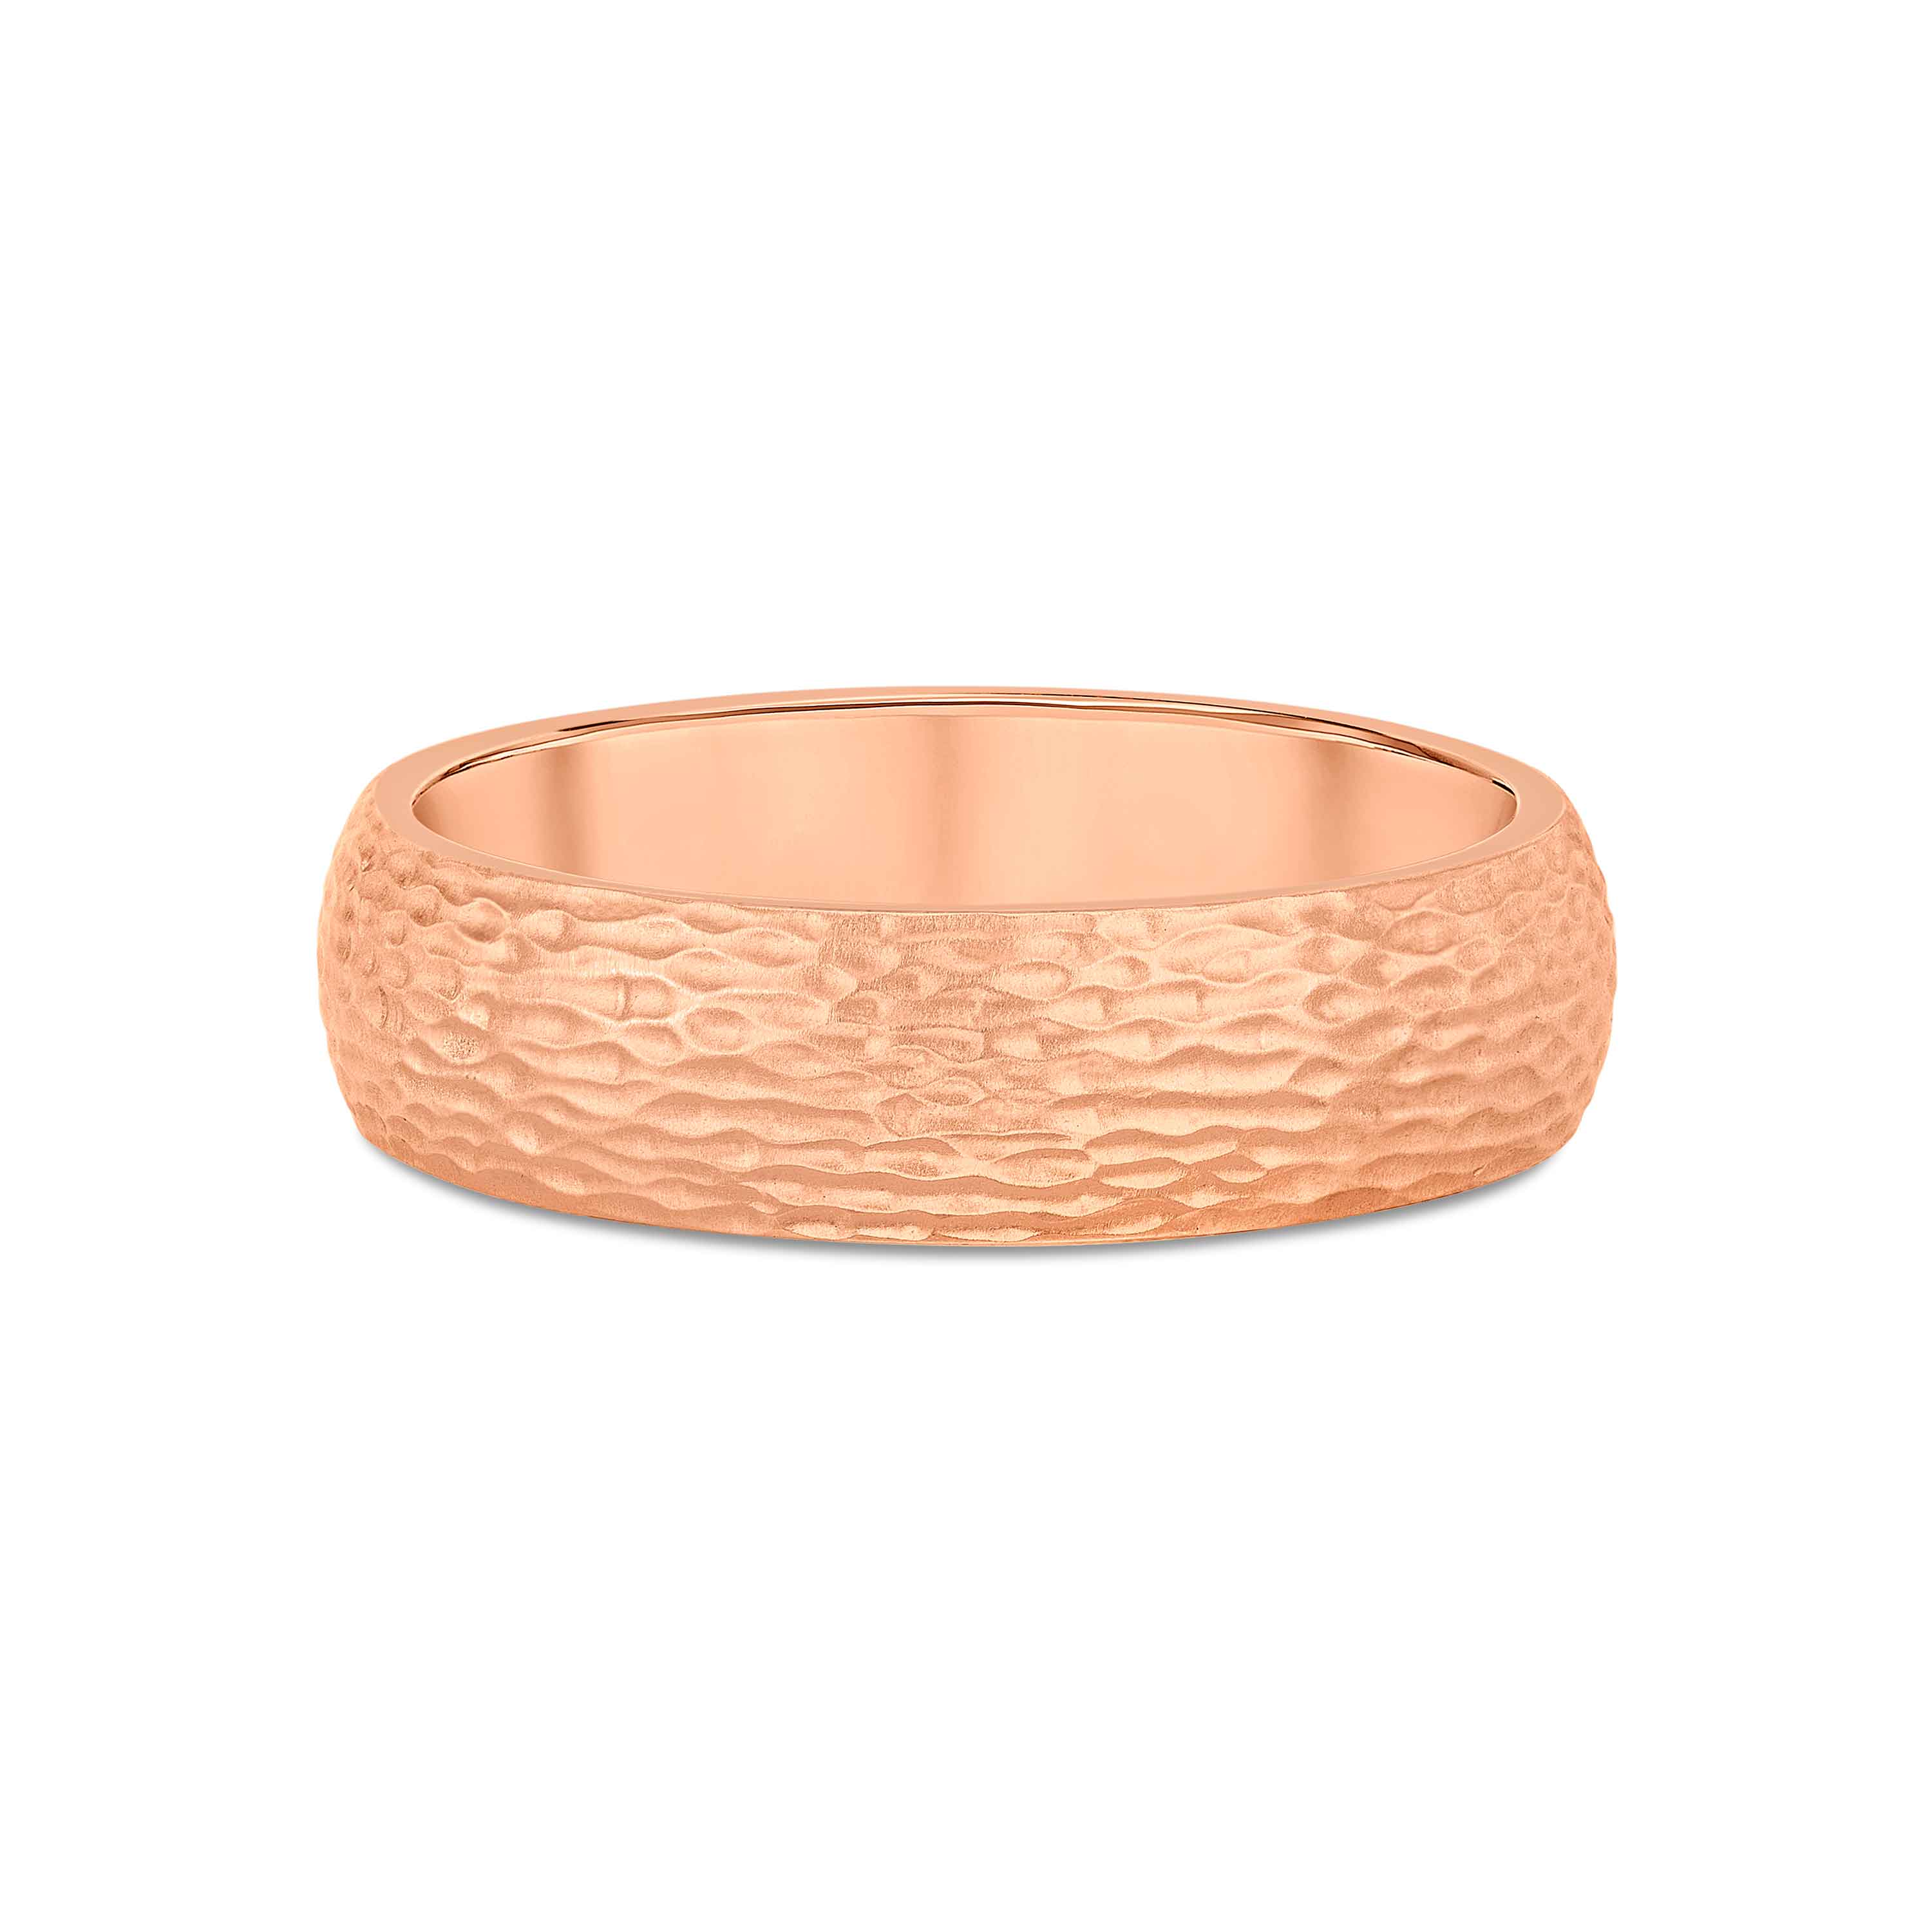 Moira Patience Fine Jewellery Signature Style Ripple Engraved Texture Wedding Band 